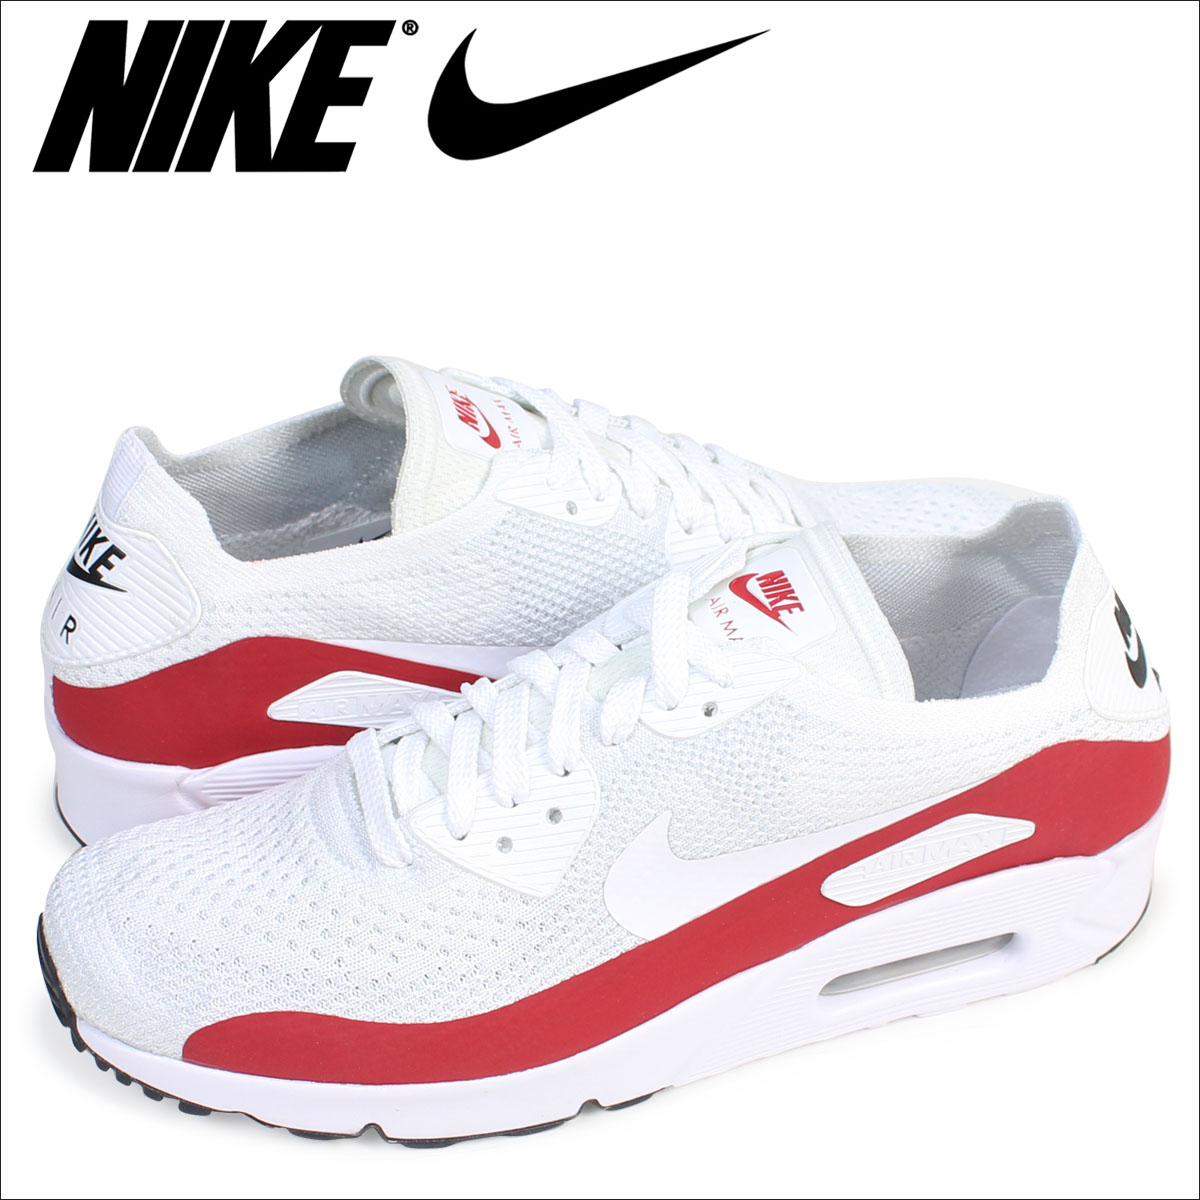 nike air max 90 ultra 2.0 flyknit red and white